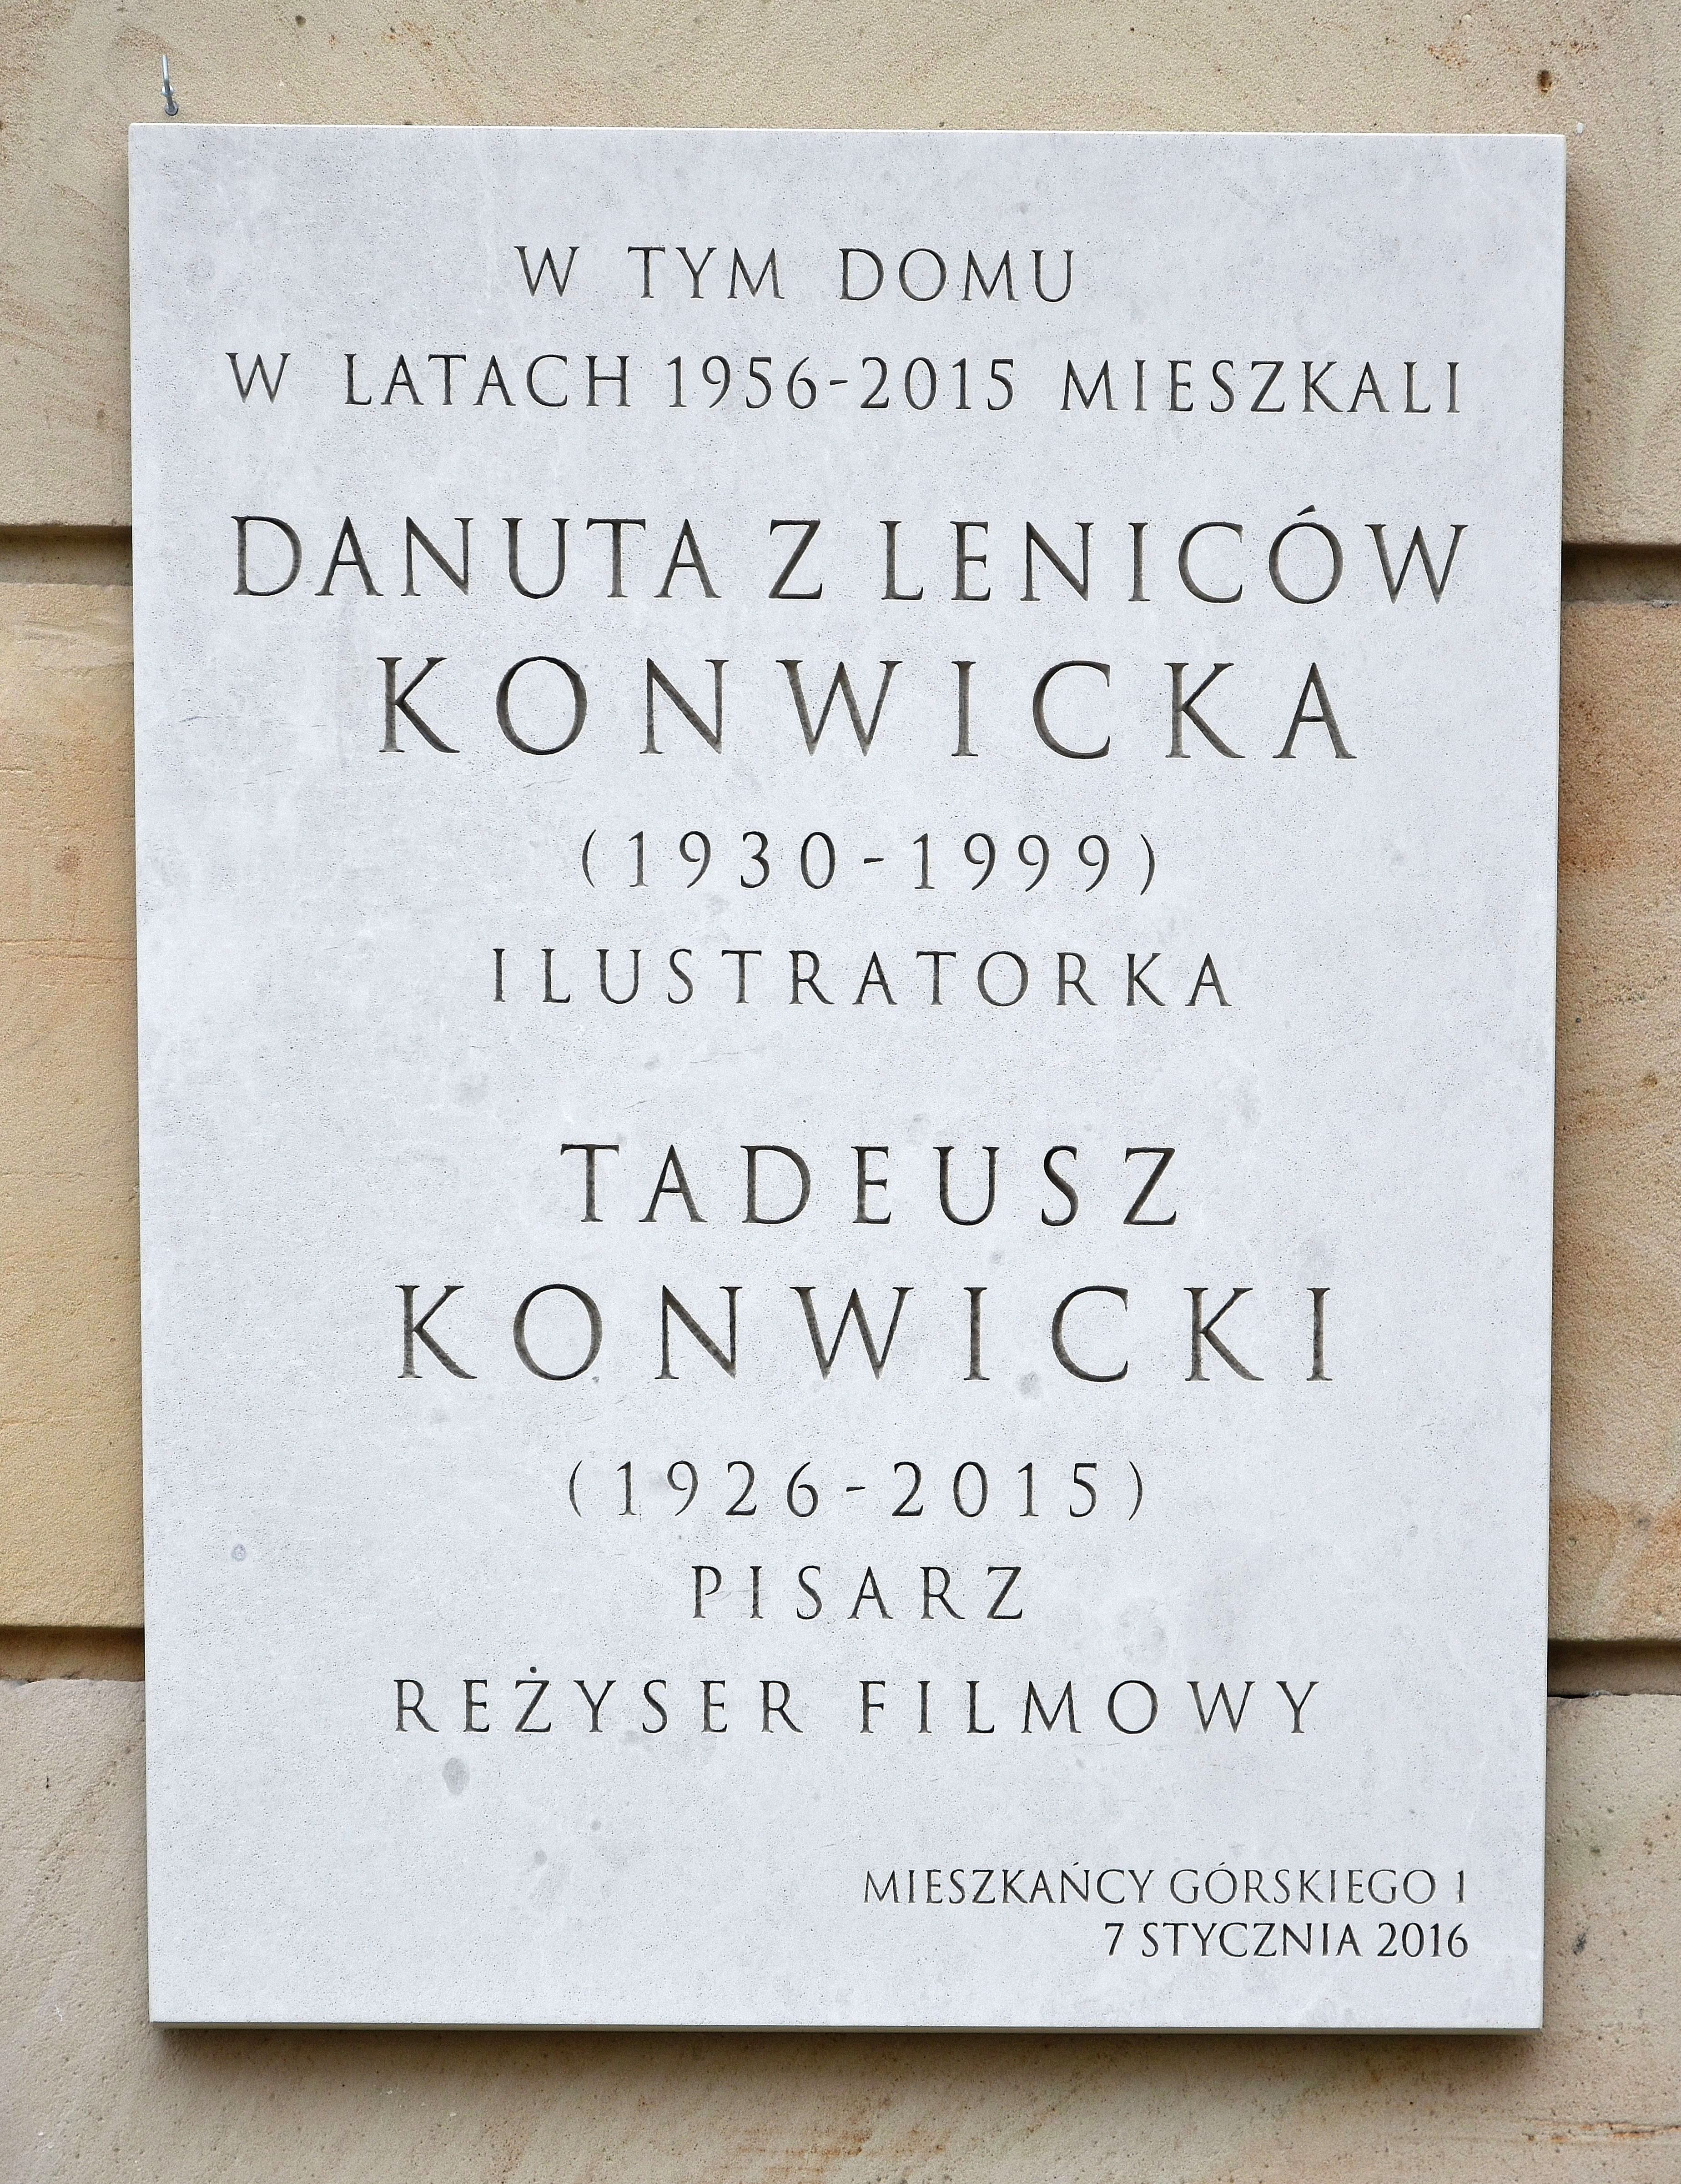 Wikipedia, Here-lived plaques in Warsaw, March 2017 in Warsaw, Poland photographs taken on 2017-03-2